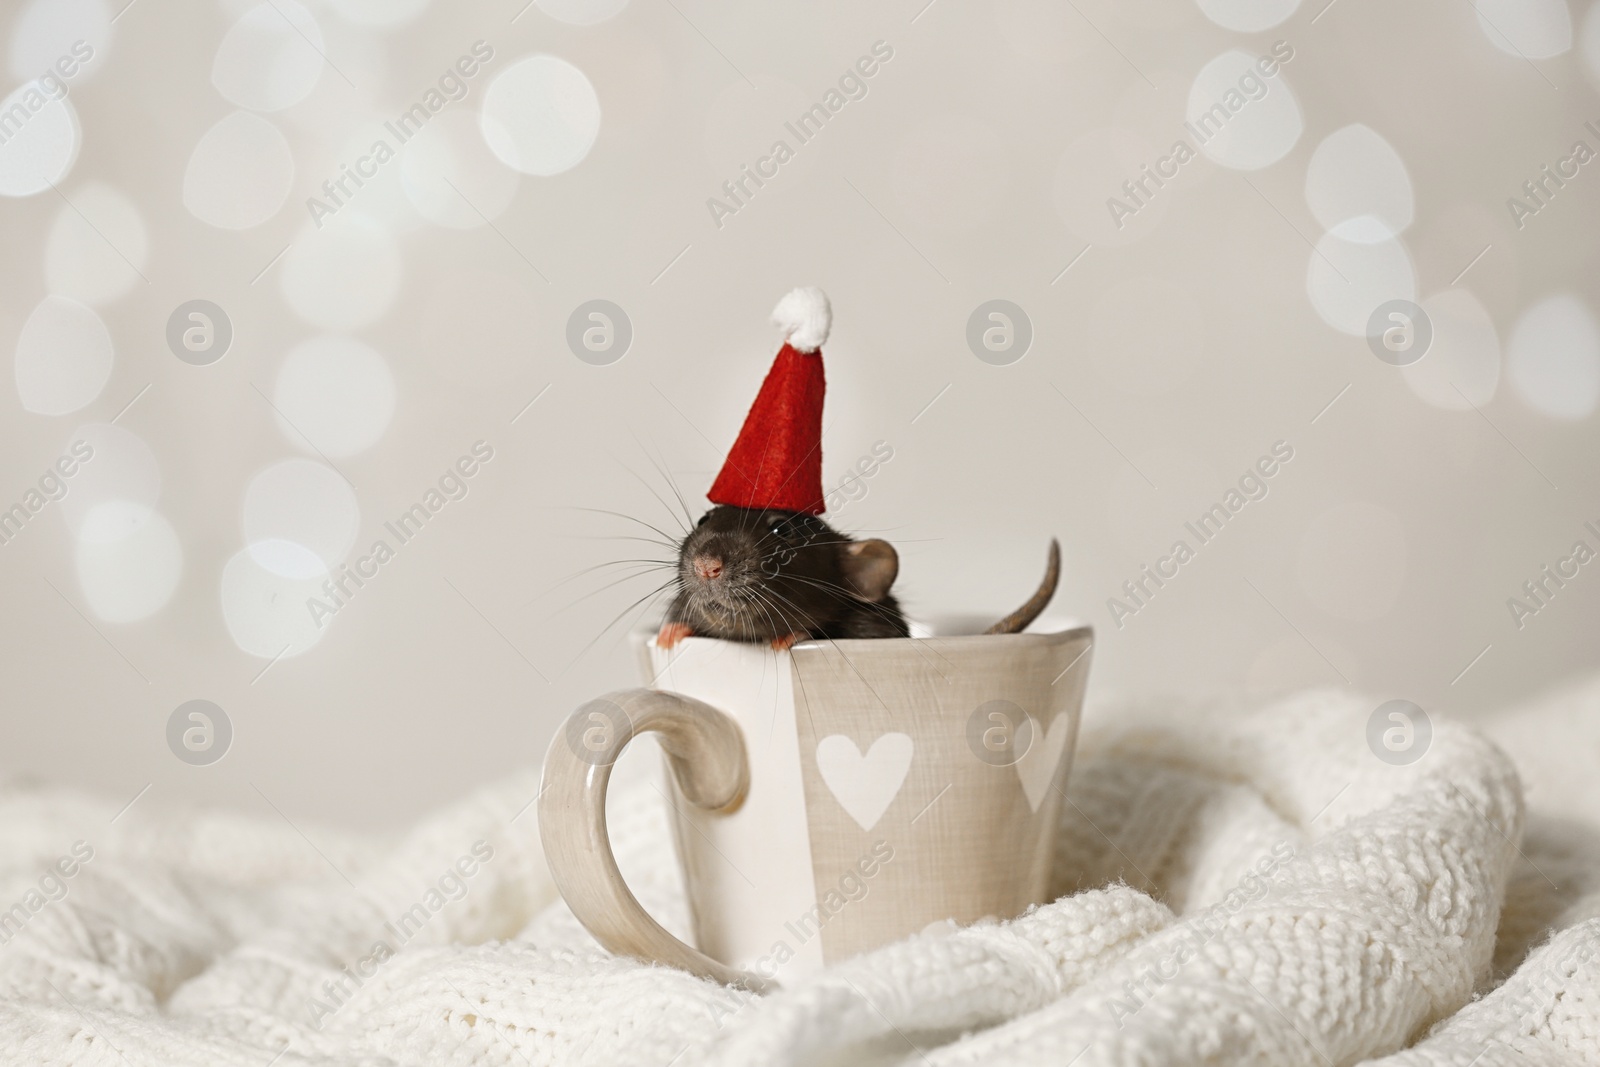 Photo of Cute little rat with Santa hat in cup on knitted blanket against blurred lights. Chinese New Year symbol